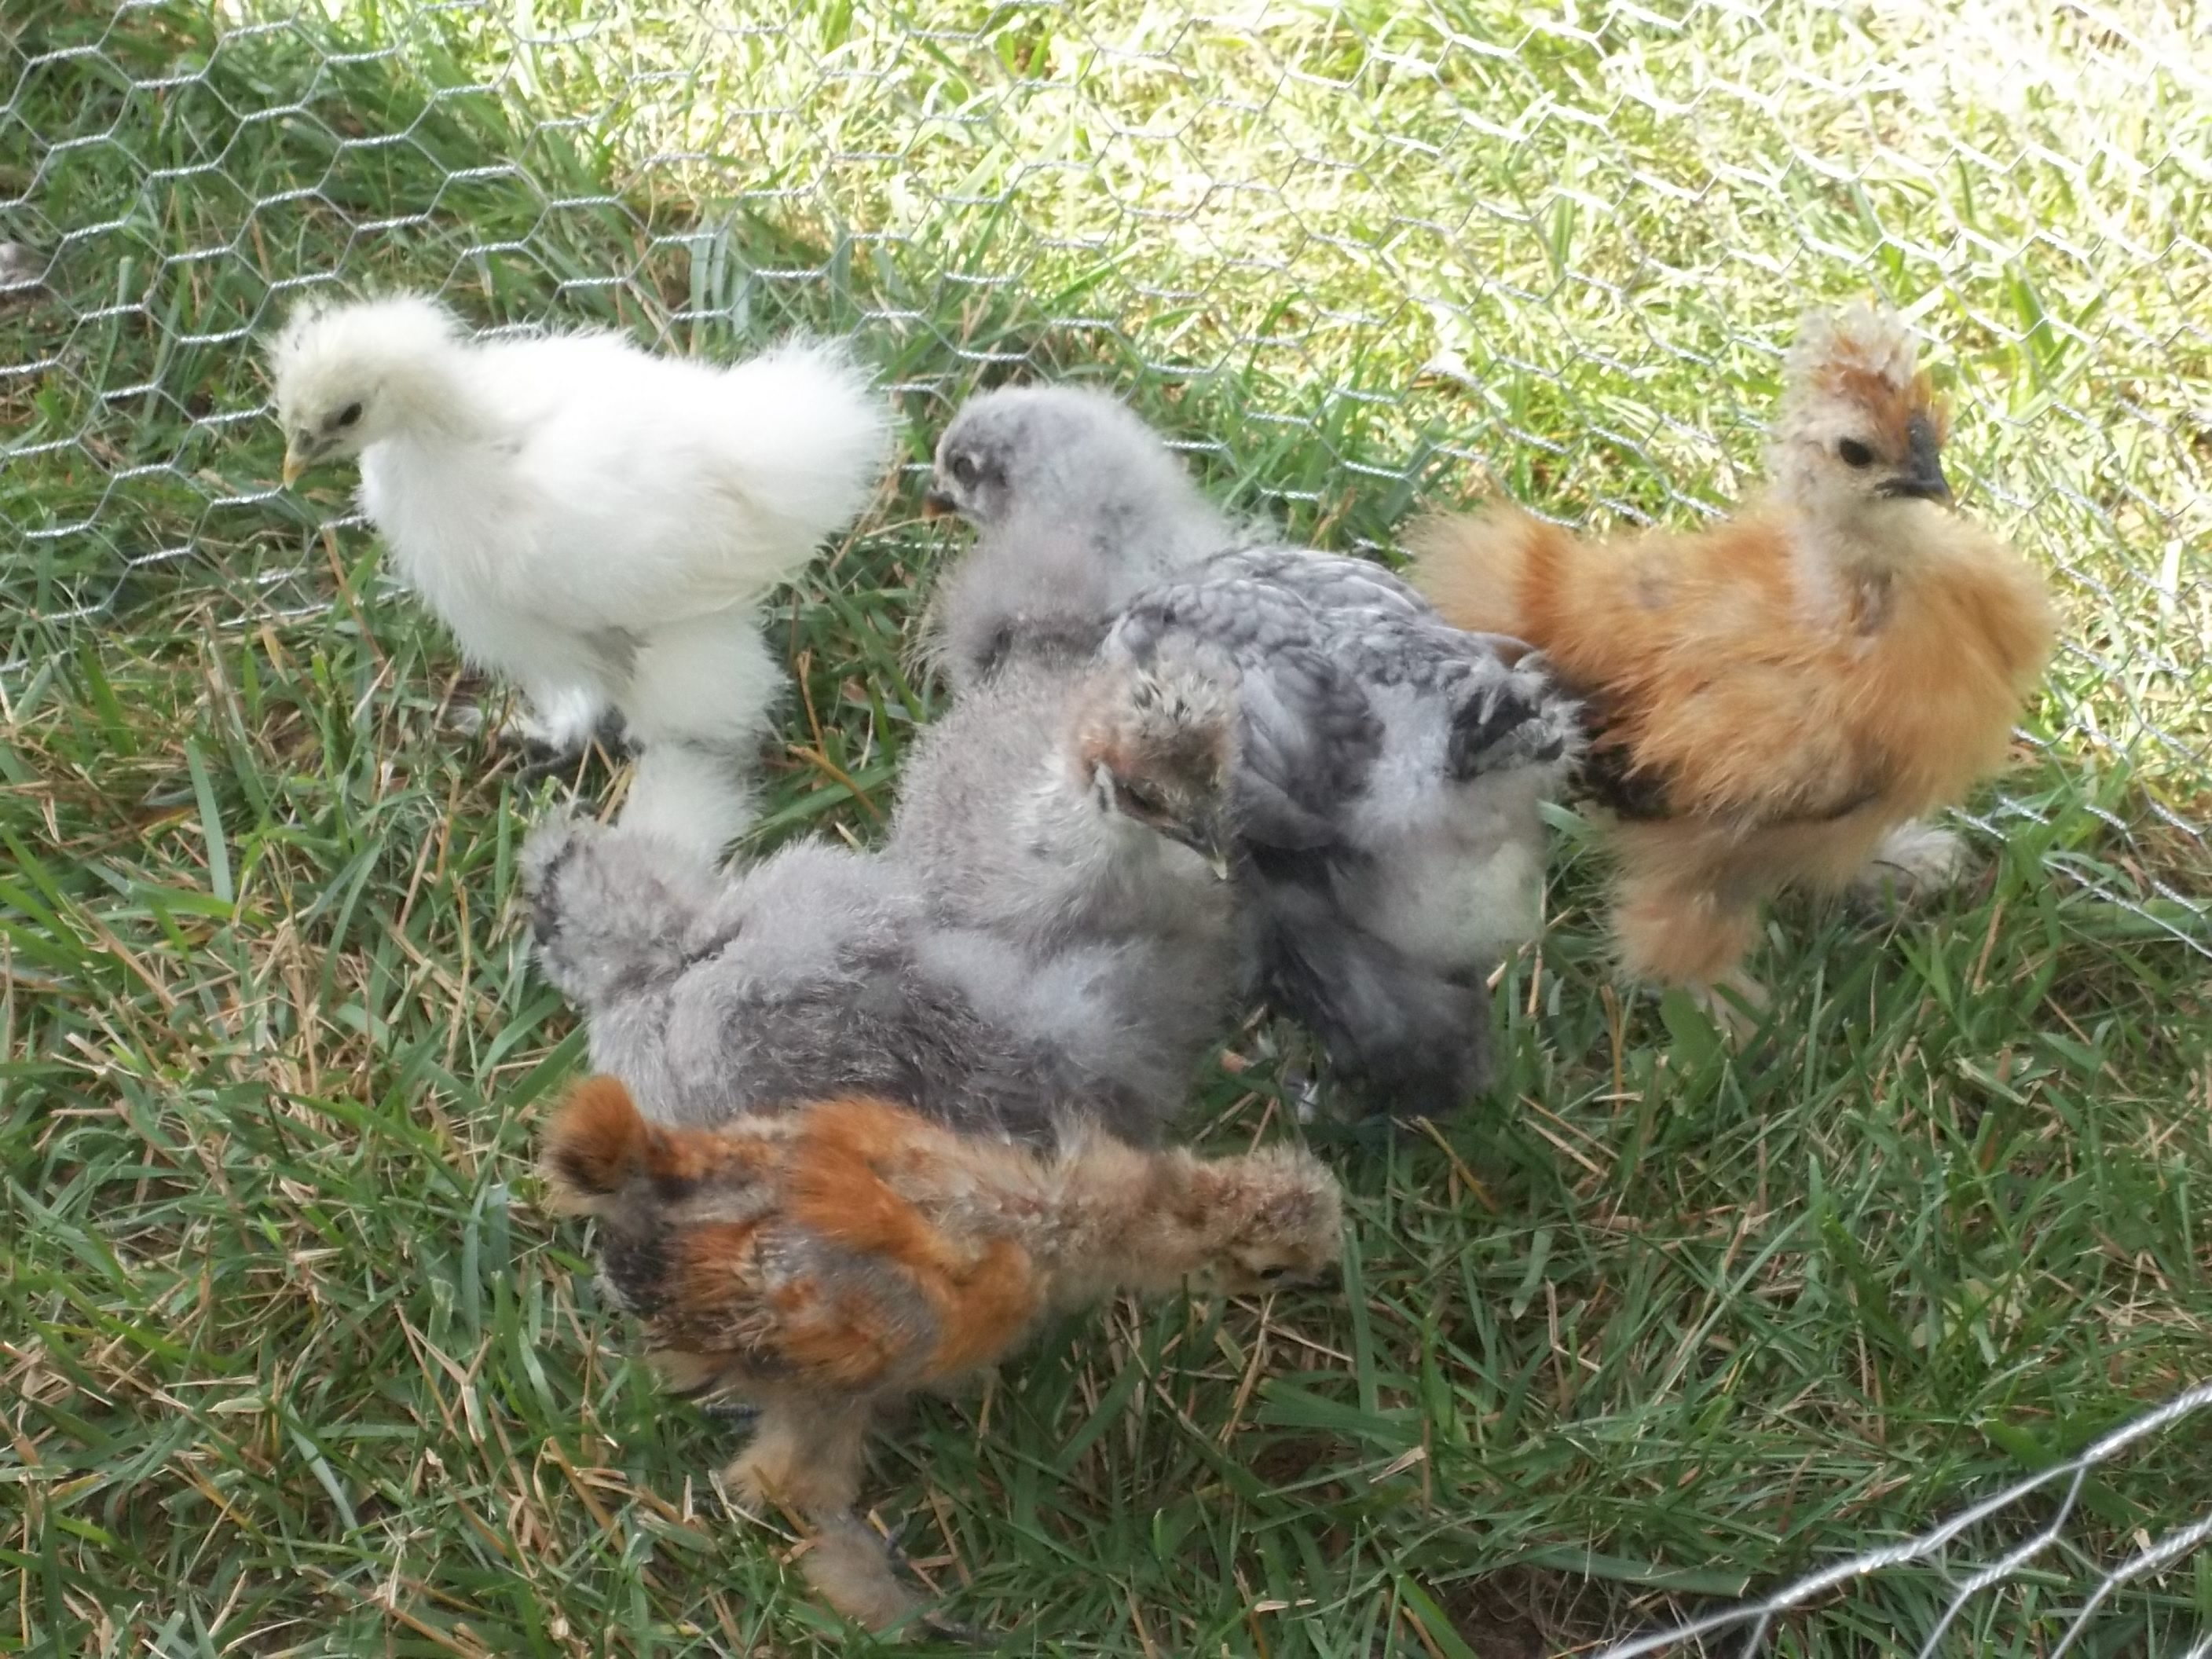 5 Silkies and 1 Cochin. Outside for first time.
Just some fresh air.